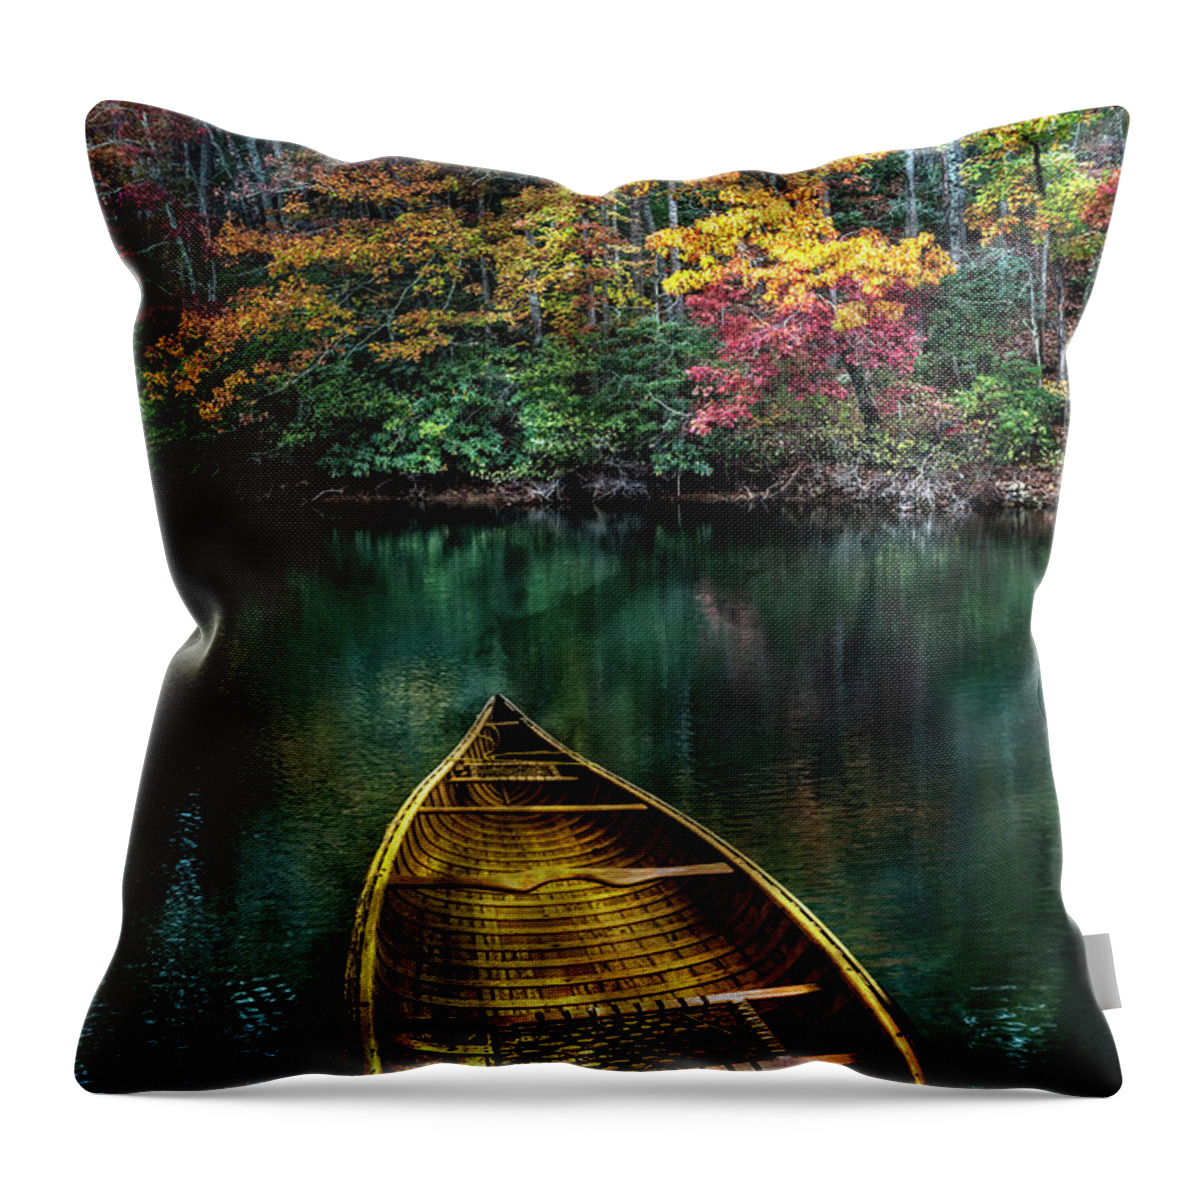 Appalachia Throw Pillow featuring the photograph In the Still of the Morning by Debra and Dave Vanderlaan